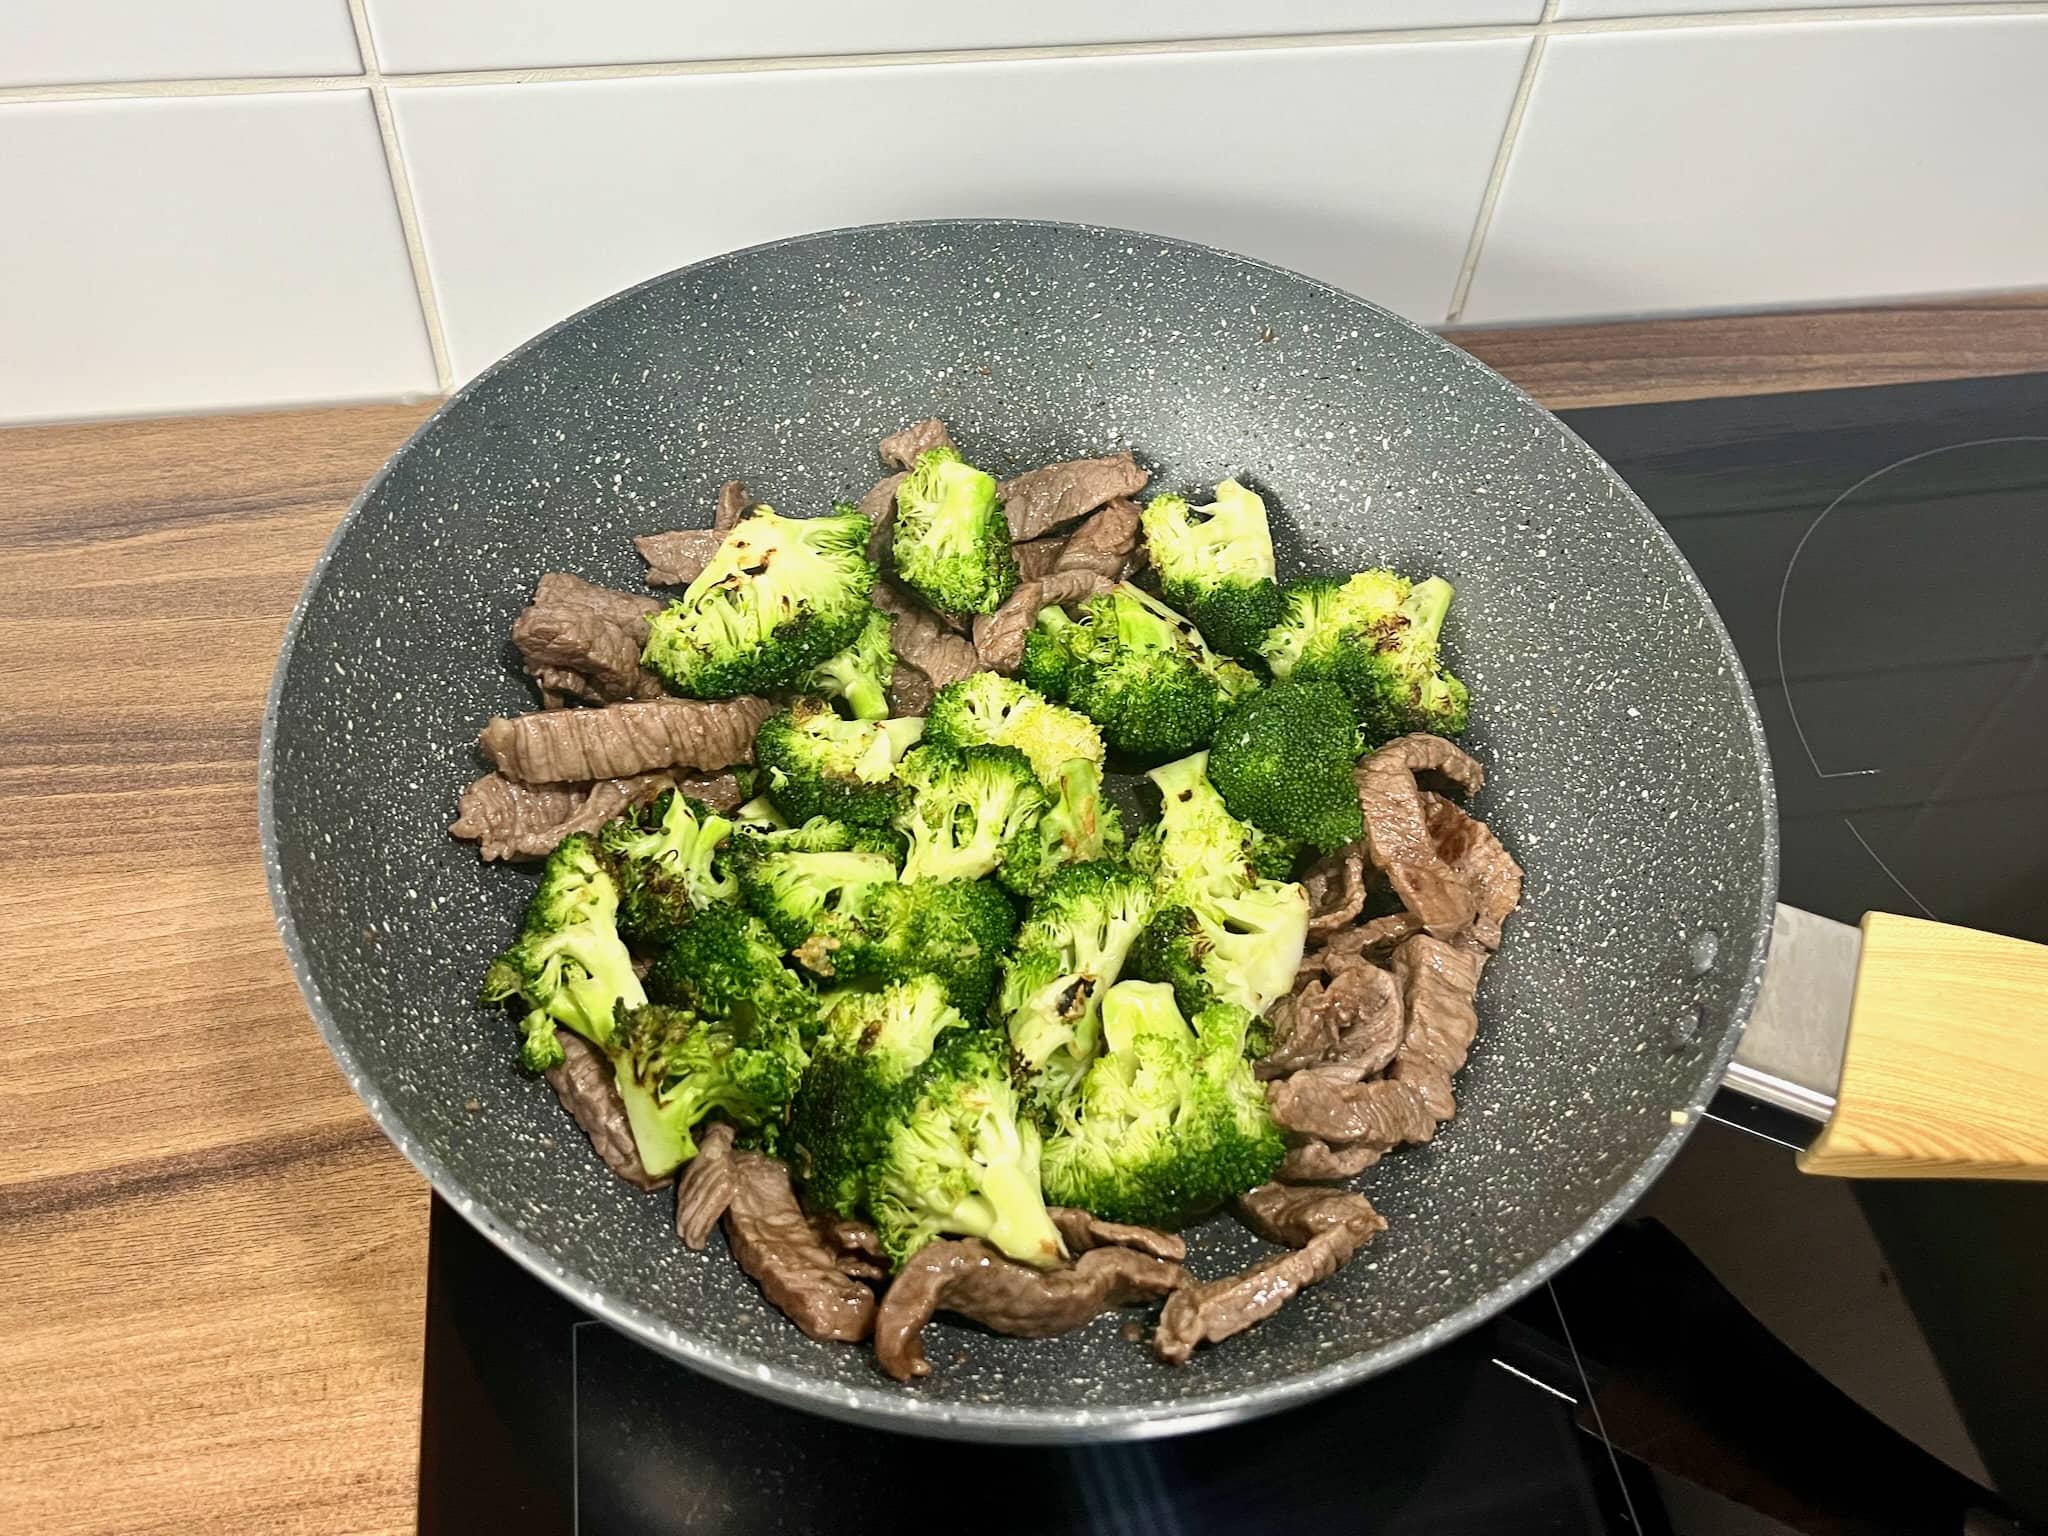 Broccoli florets added on top of beef slices in a pan